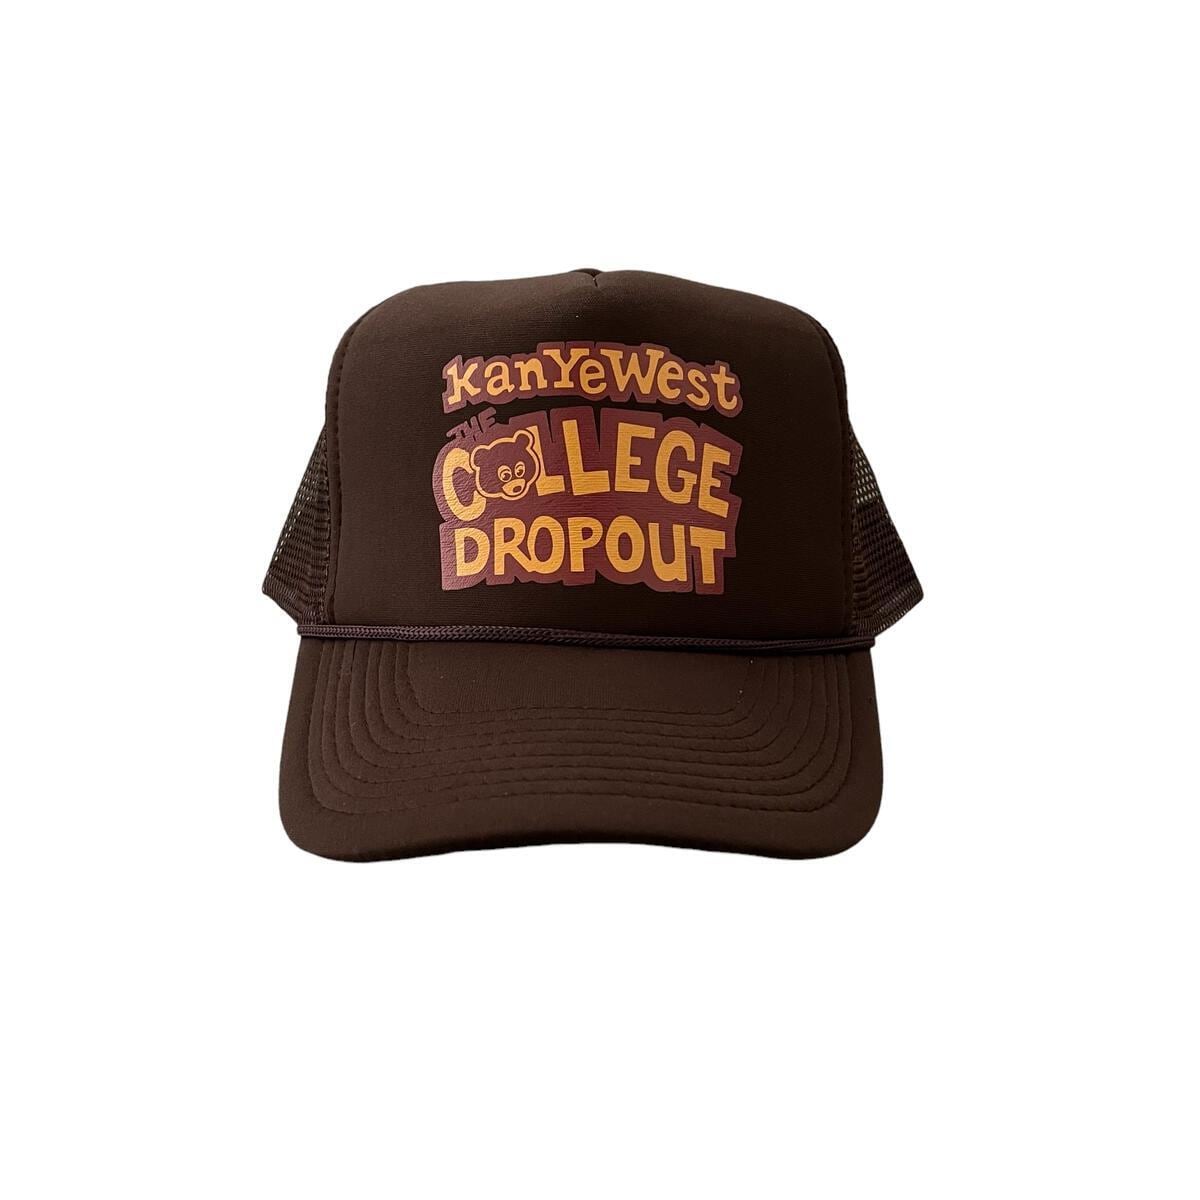 KANYE WEST COLLEGE DROPOUT TRUCKER HAT BROWN ...